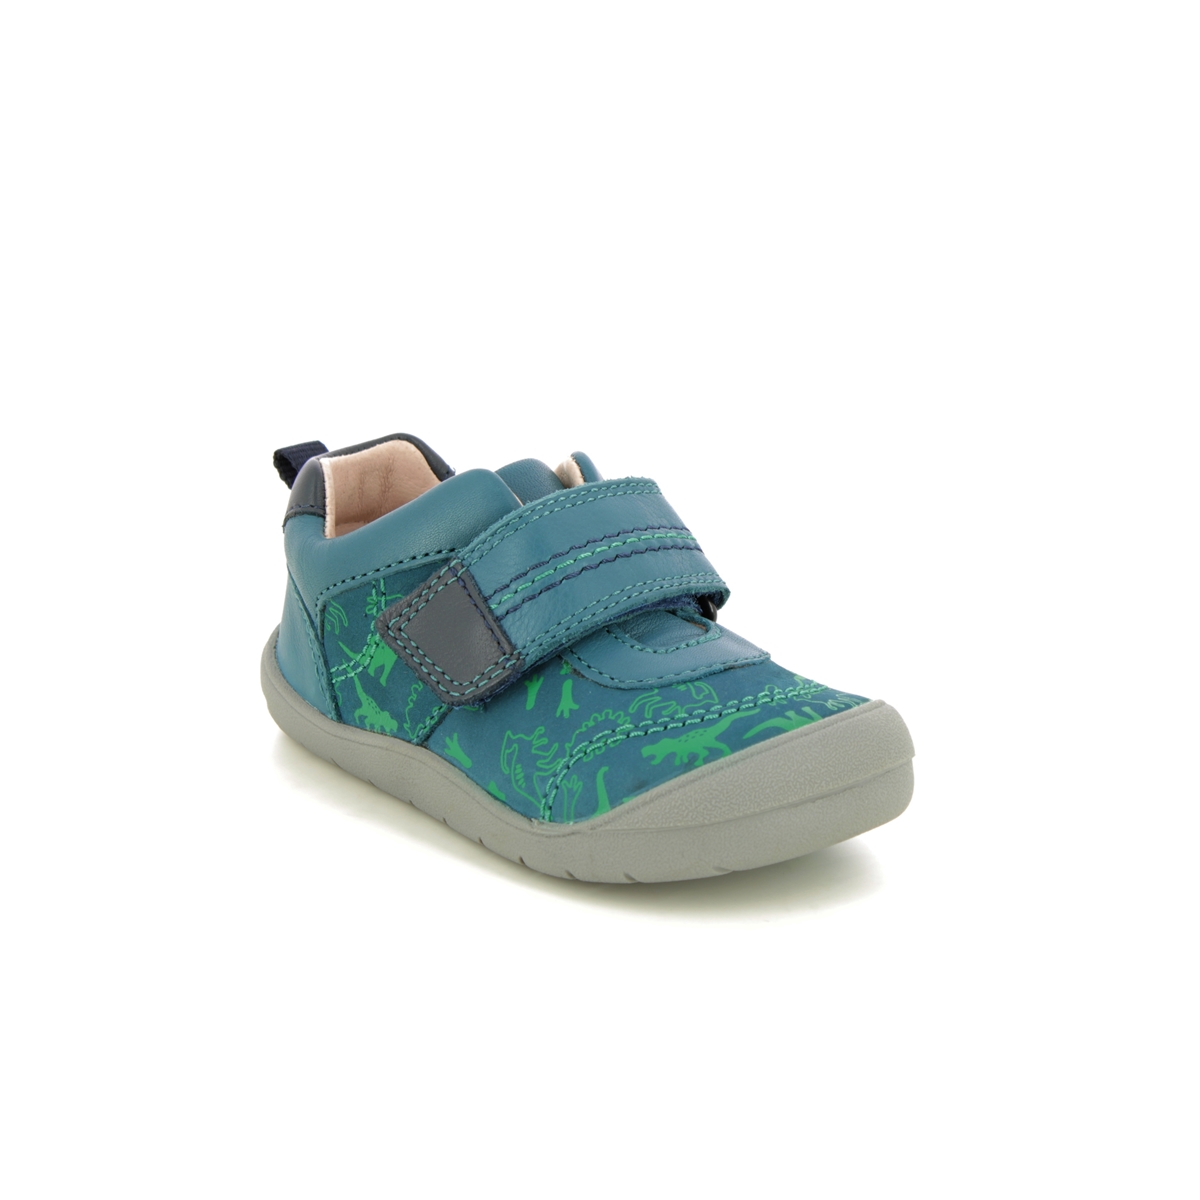 Start Rite - Footprint In Teal Blue 0769-46F In Size 4 In Plain Teal Blue Boys First And Toddler Shoes  In Teal Blue For kids